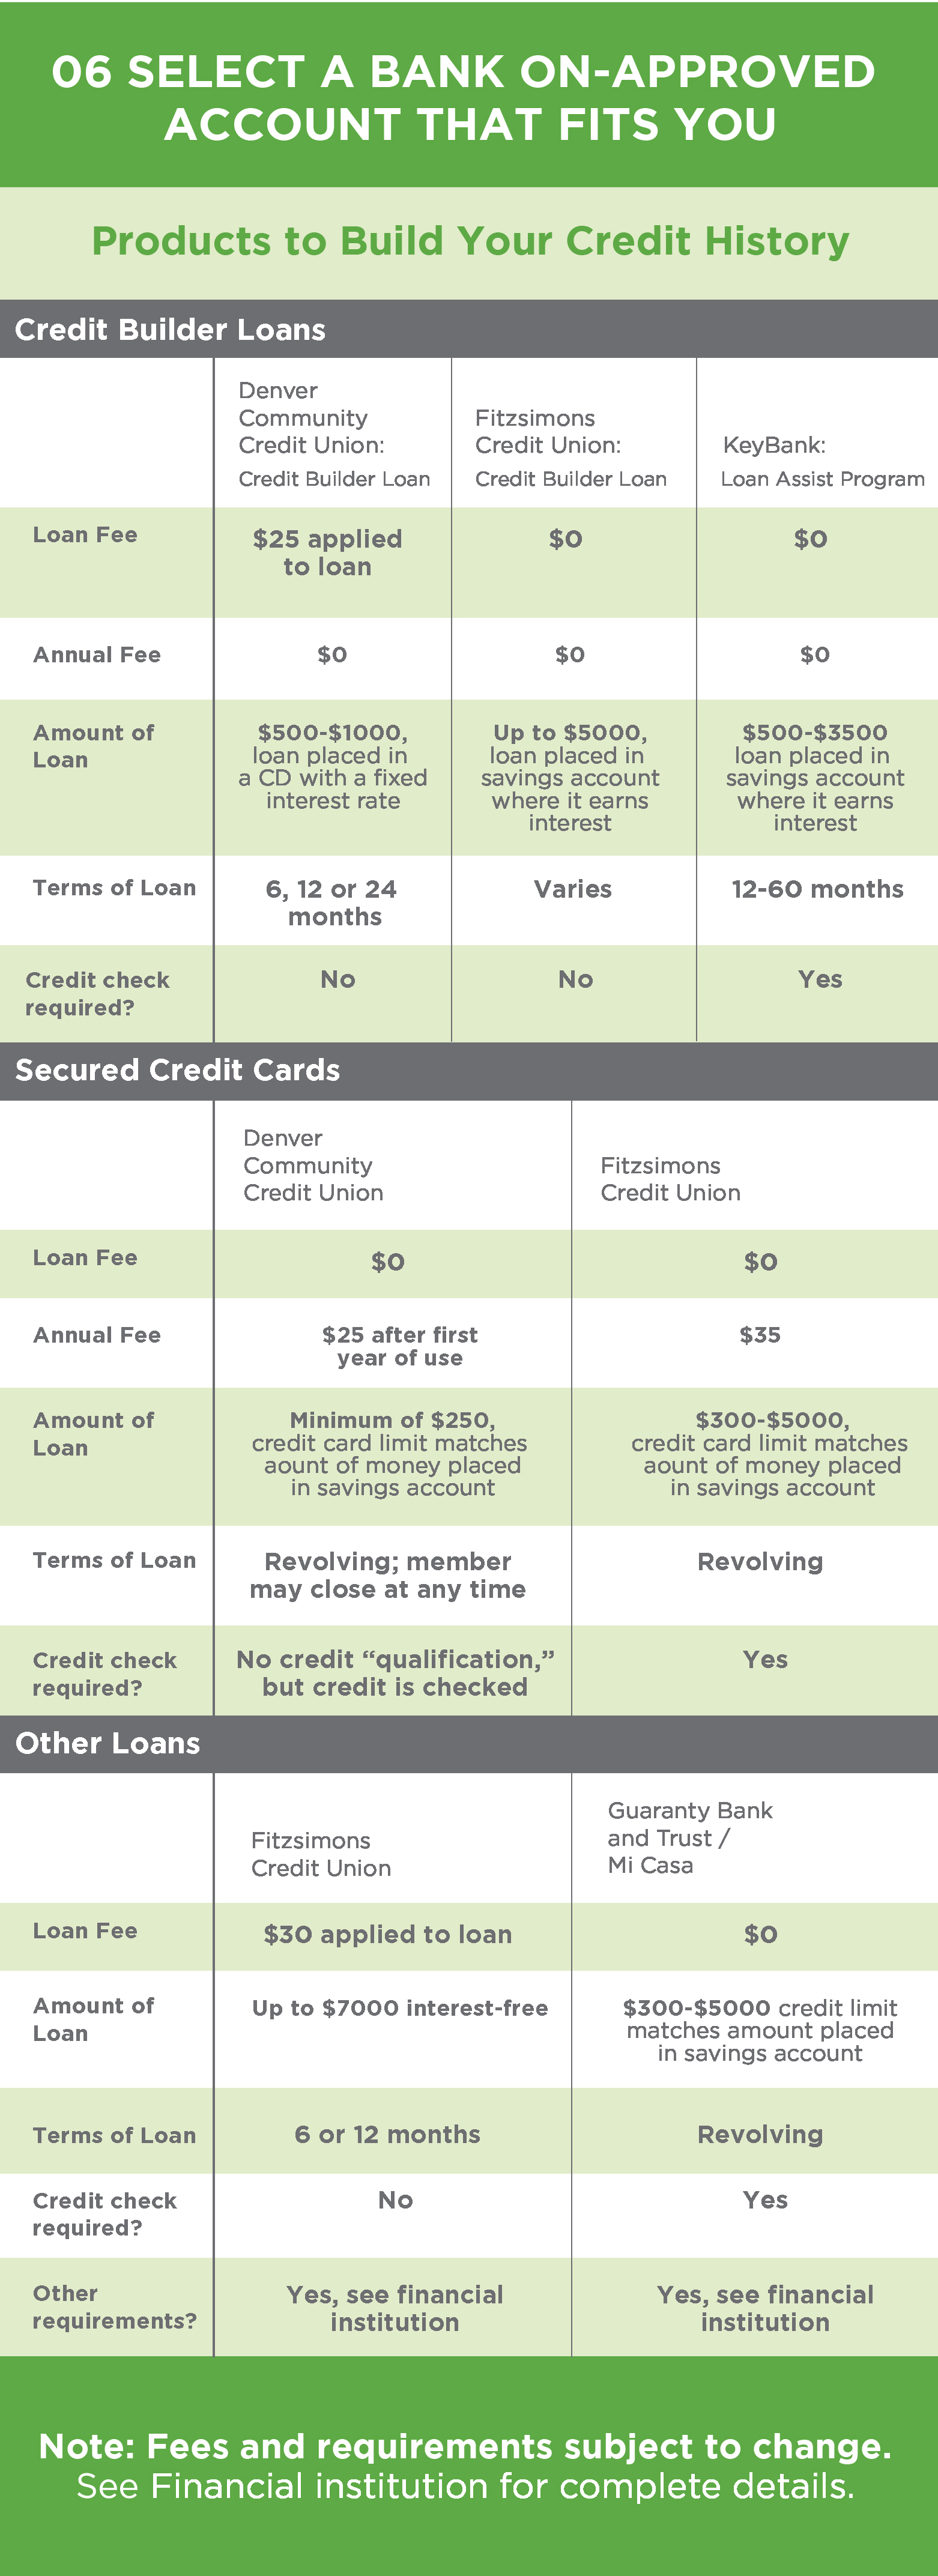 Products to Help Build Credit